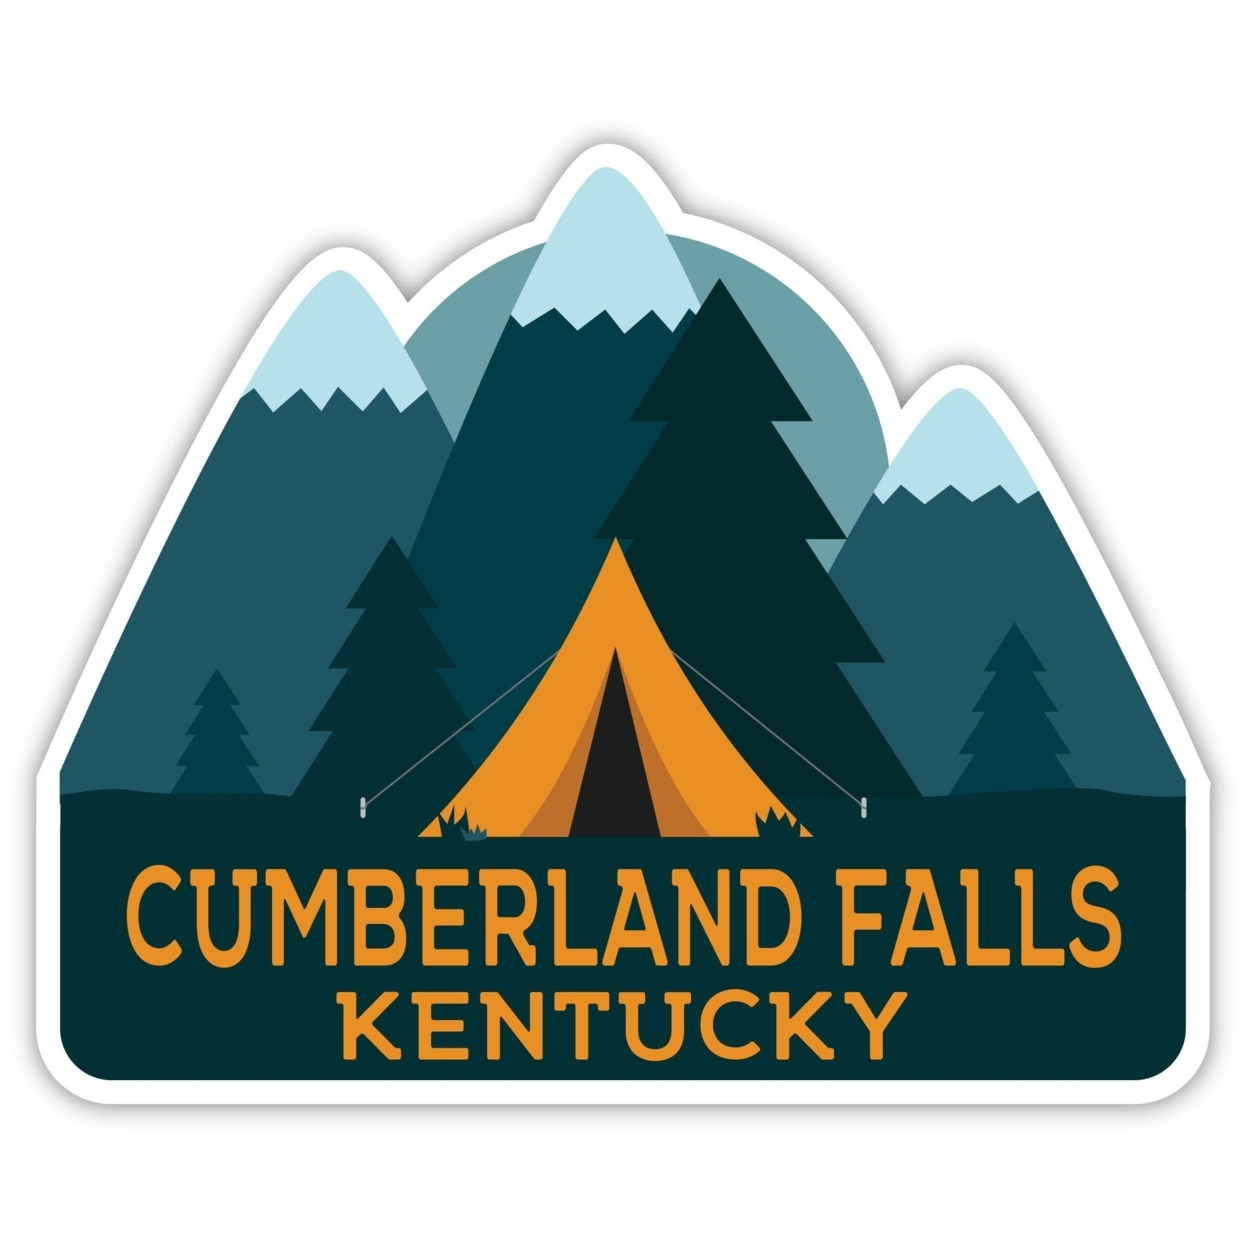 Cumberland Falls Kentucky Souvenir Decorative Stickers (Choose Theme And Size) - 4-Pack, 2-Inch, Tent